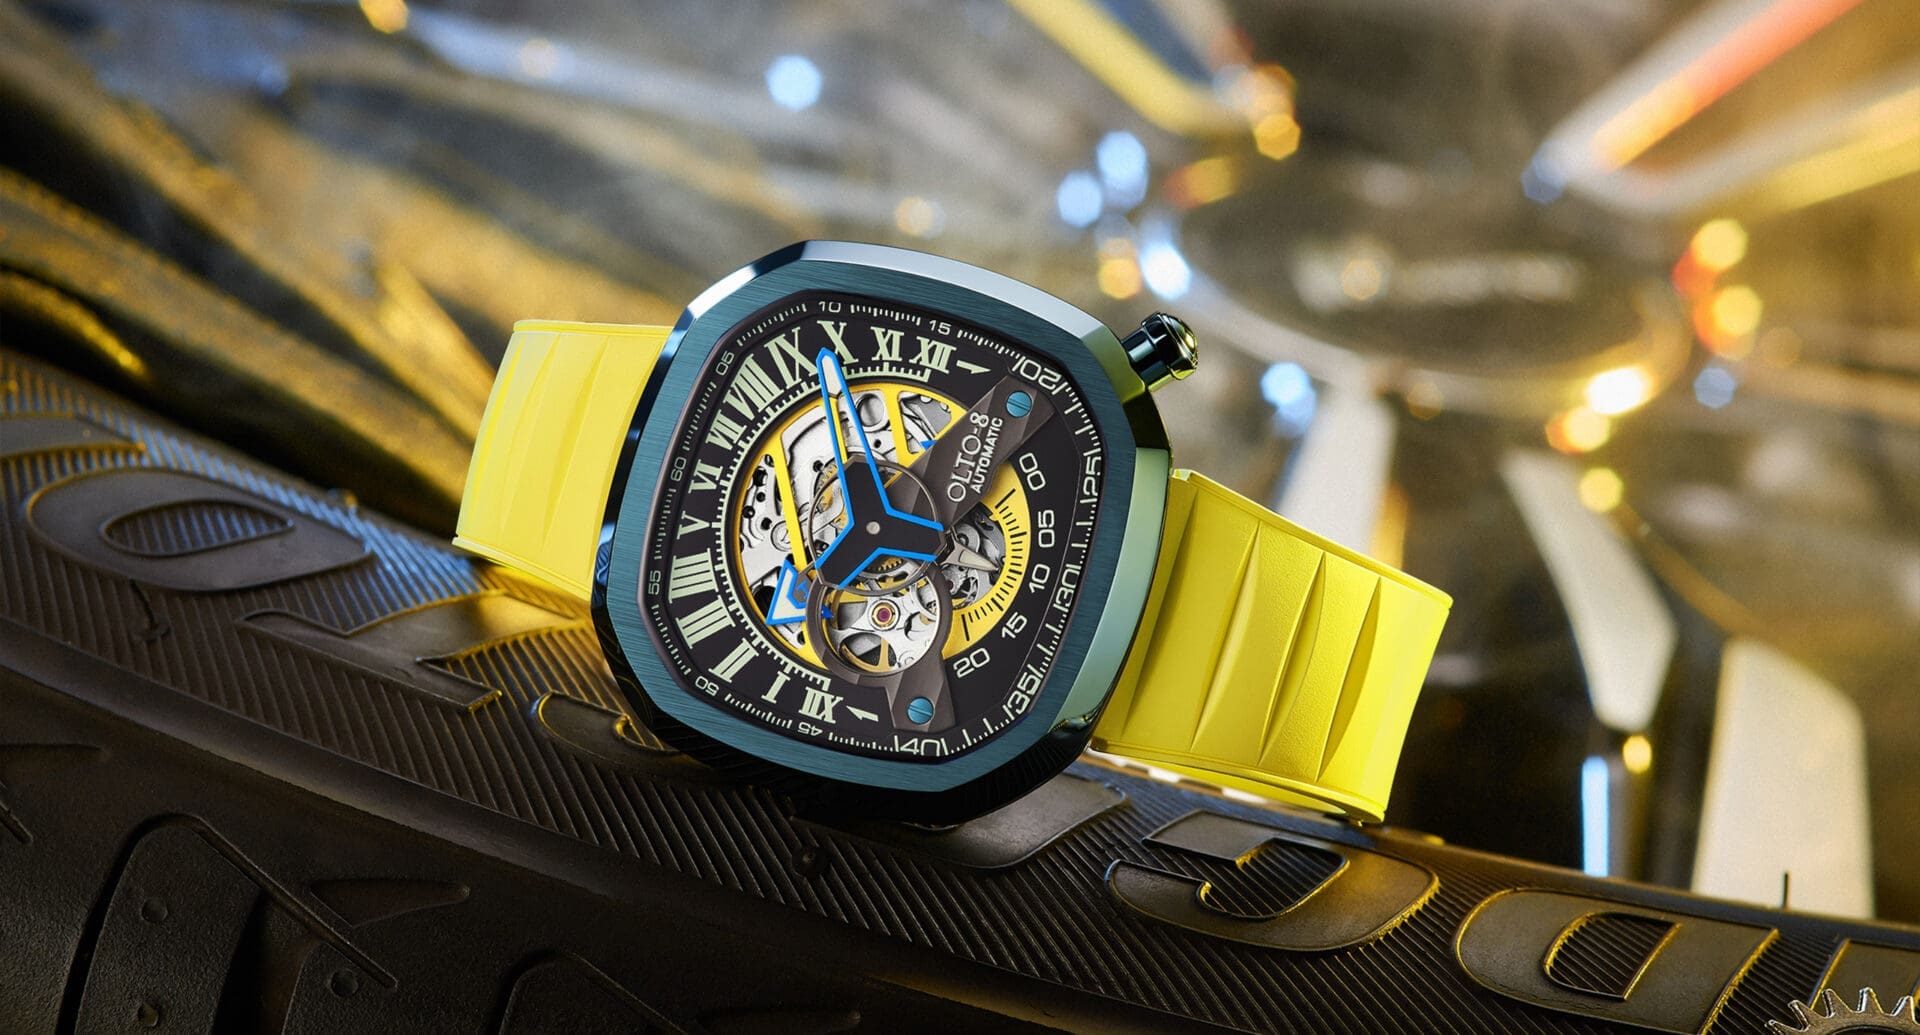 MICRO MONDAYS: The Olto-8 Infinity II is a high-octane extravaganza of a watch